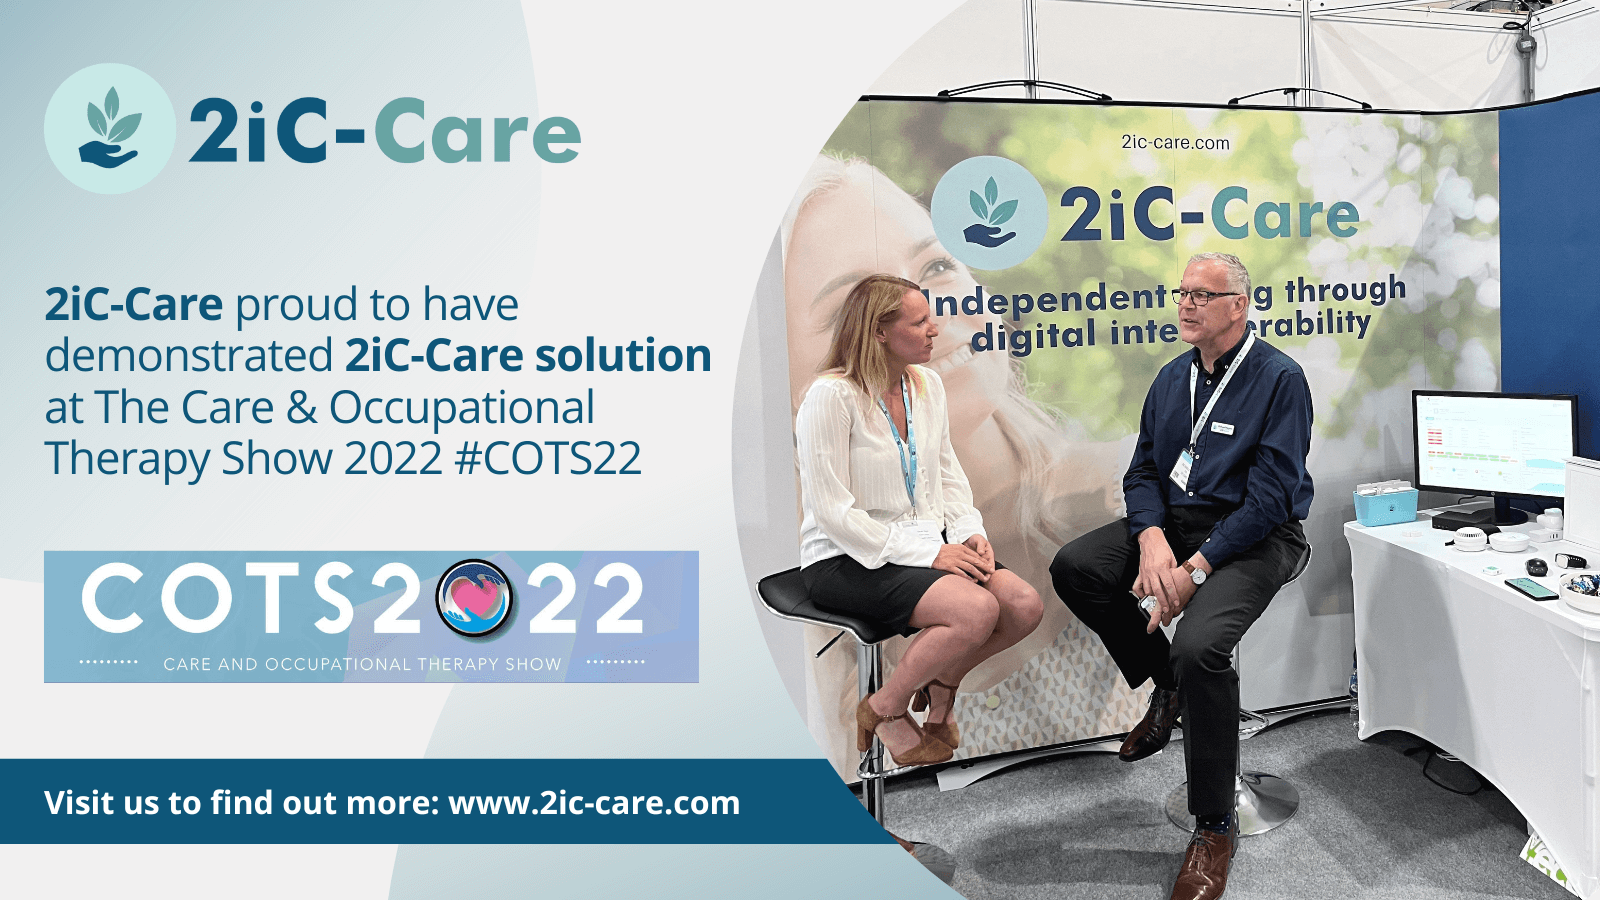 2iC-Care proud to have demonstrated 2iC-Care solution at COTS22 Exhibition, Exeter